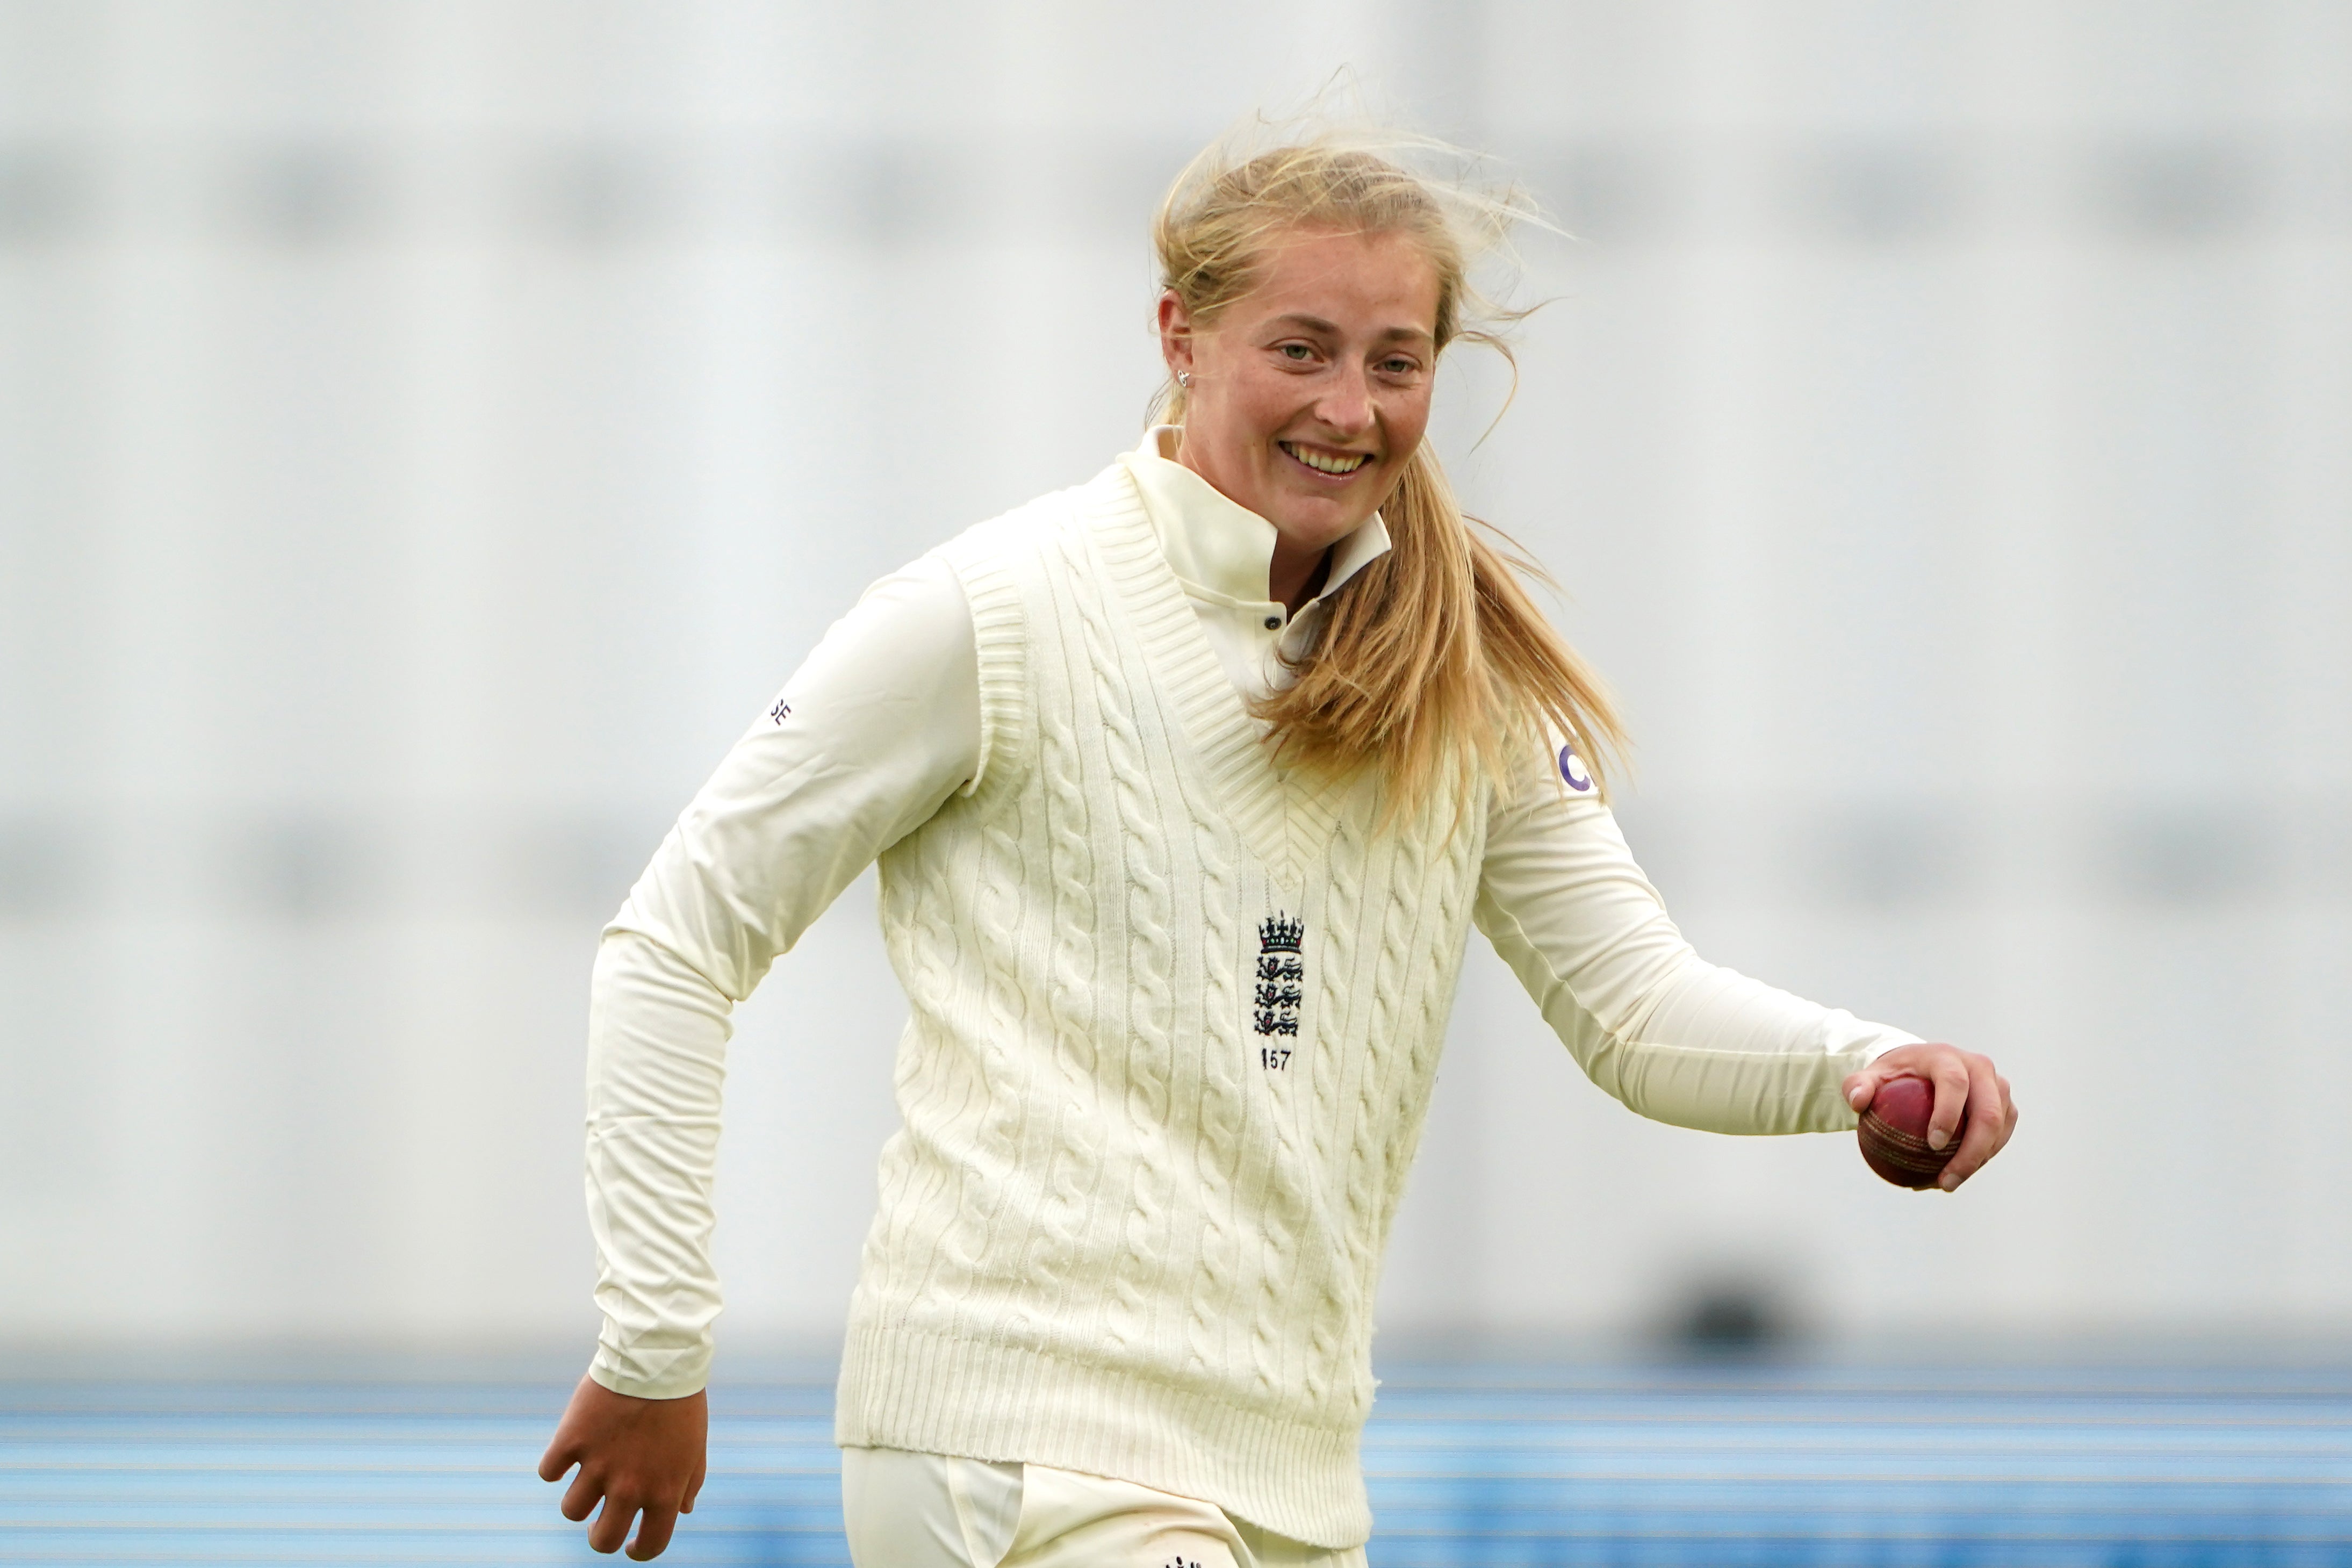 England’s Sophie Ecclestone claimed three wickets at the start of day three as India were bowled out for 231 in the first innings